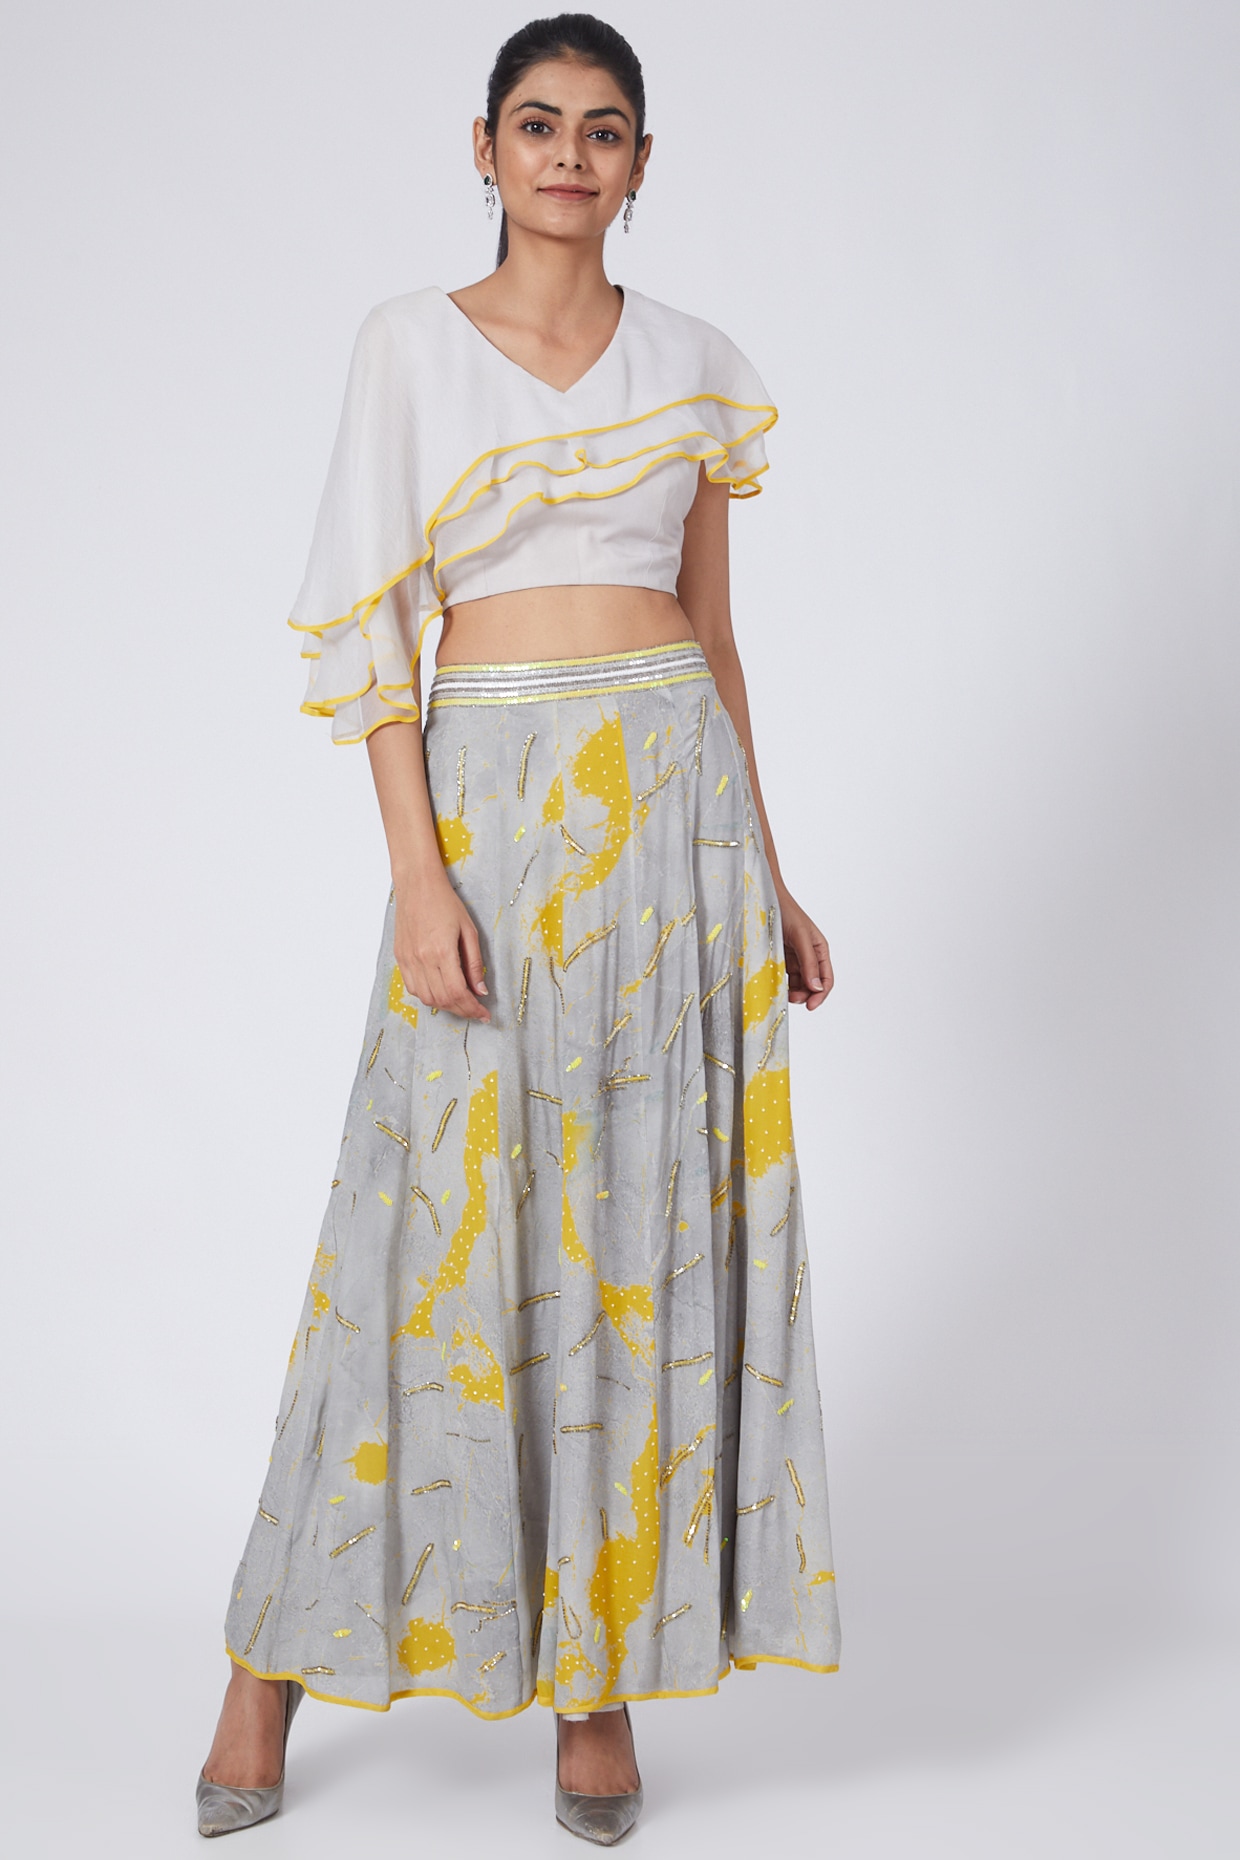 embroidered skirt yellow